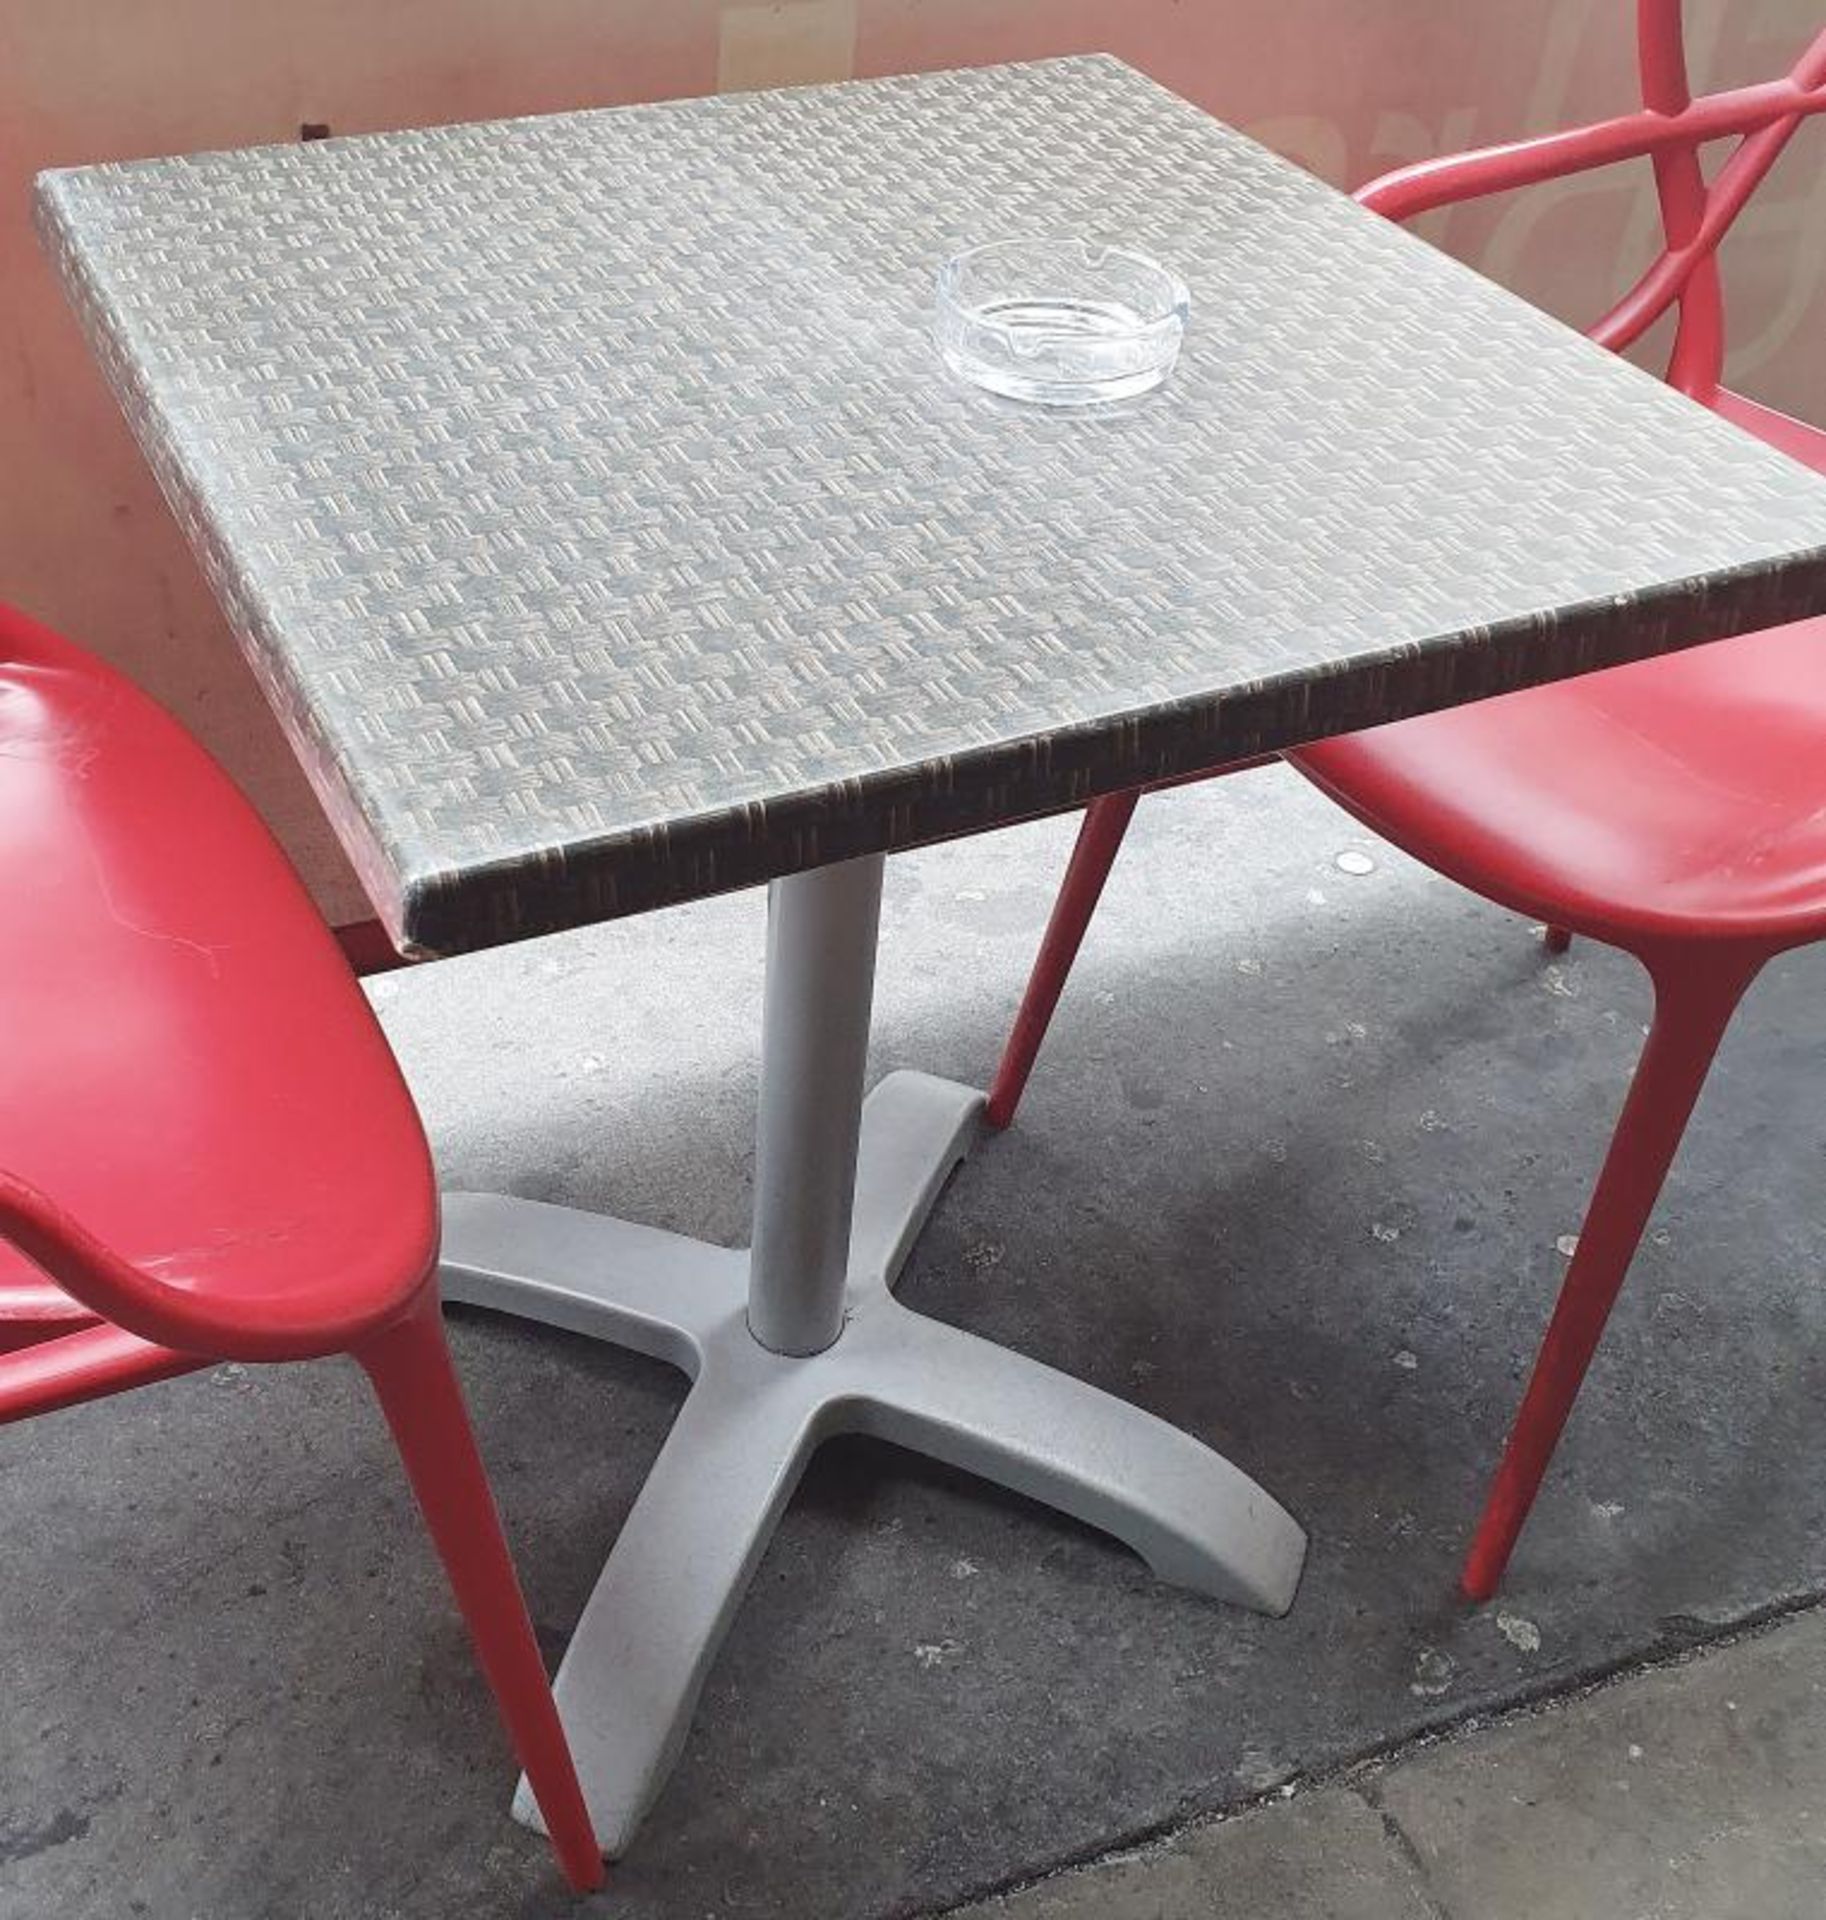 6 x Outdoor Square Bistro Tables With A Rattan-Effect Tops - From A Milan-style City Centre Cafe